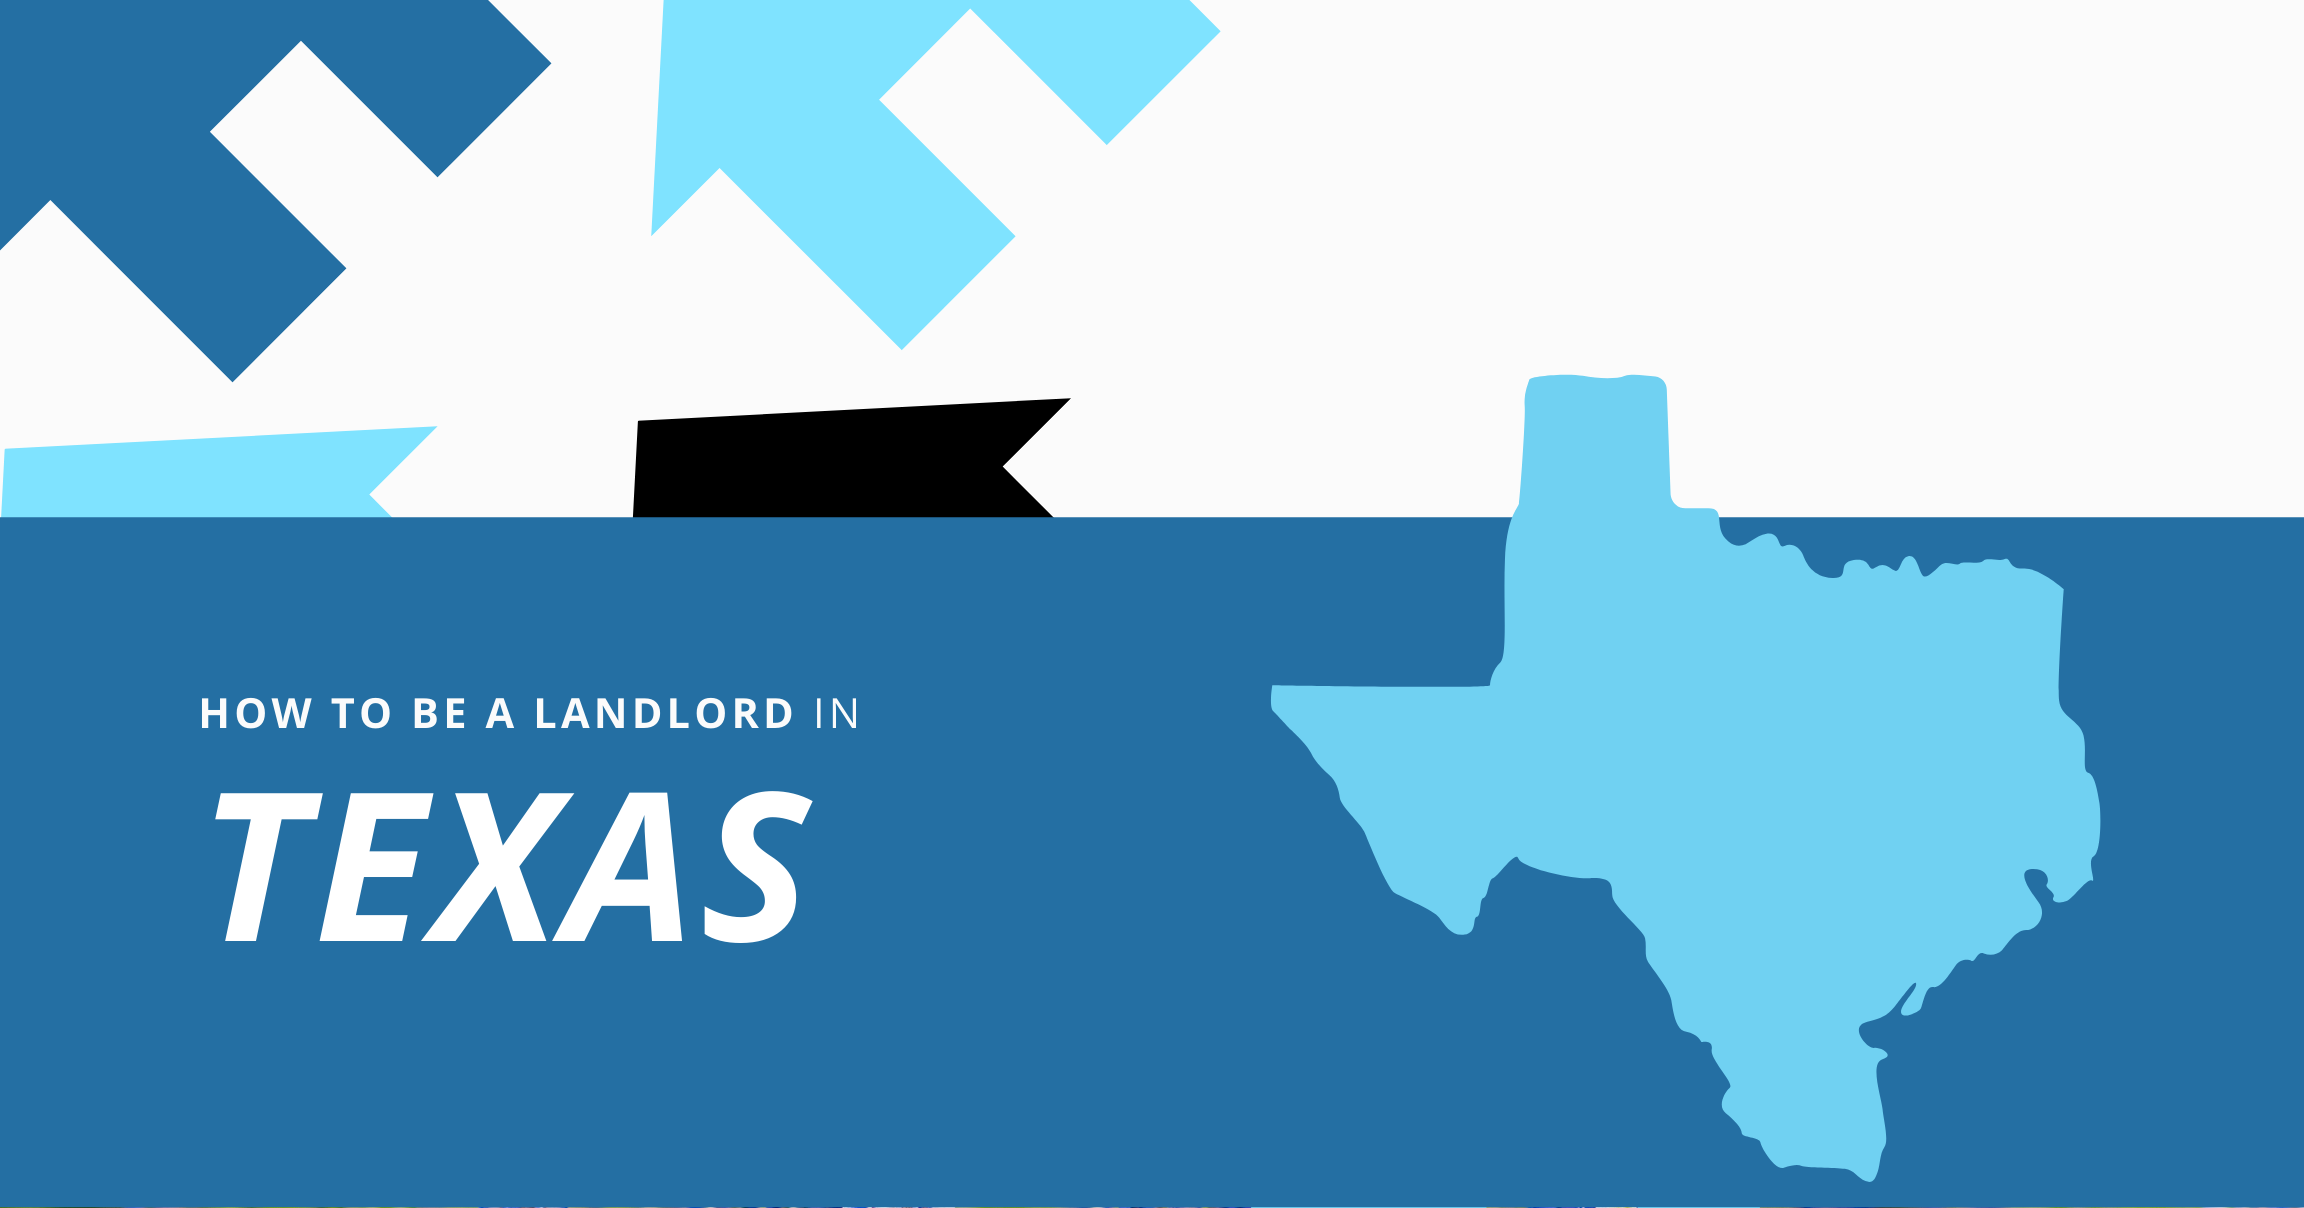 How to be a landlord in Texas